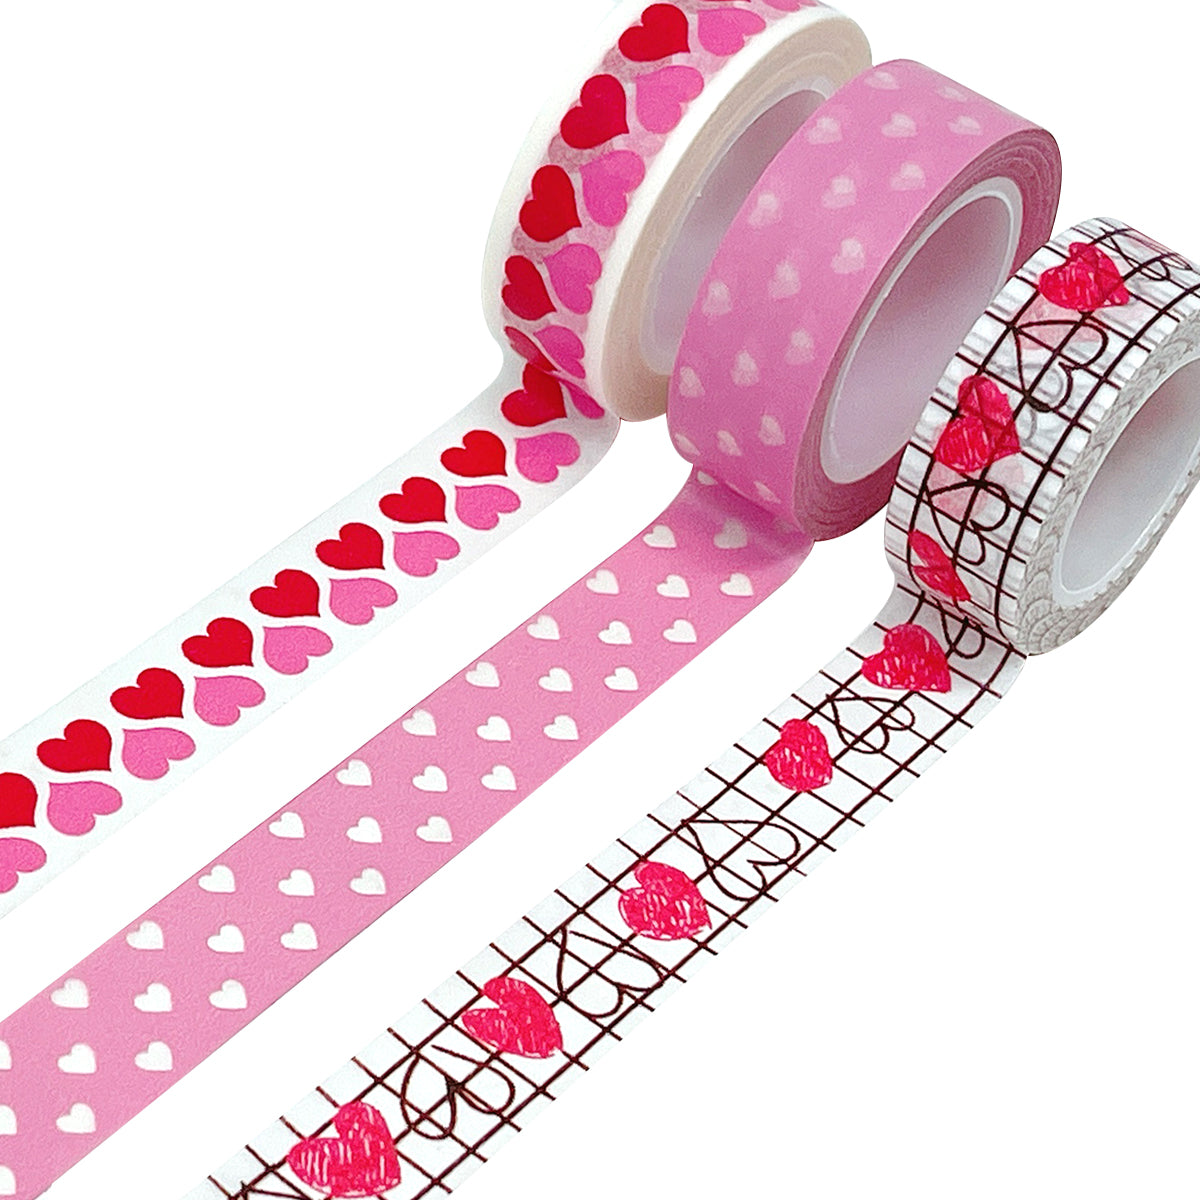 Hand Drawn Sketchy Heart Washi Tape, Valentine Washi, Love Washi, Wedding  Washi, Hand Drawn Pattern Heart Tape BBB Supplies R-GH204 